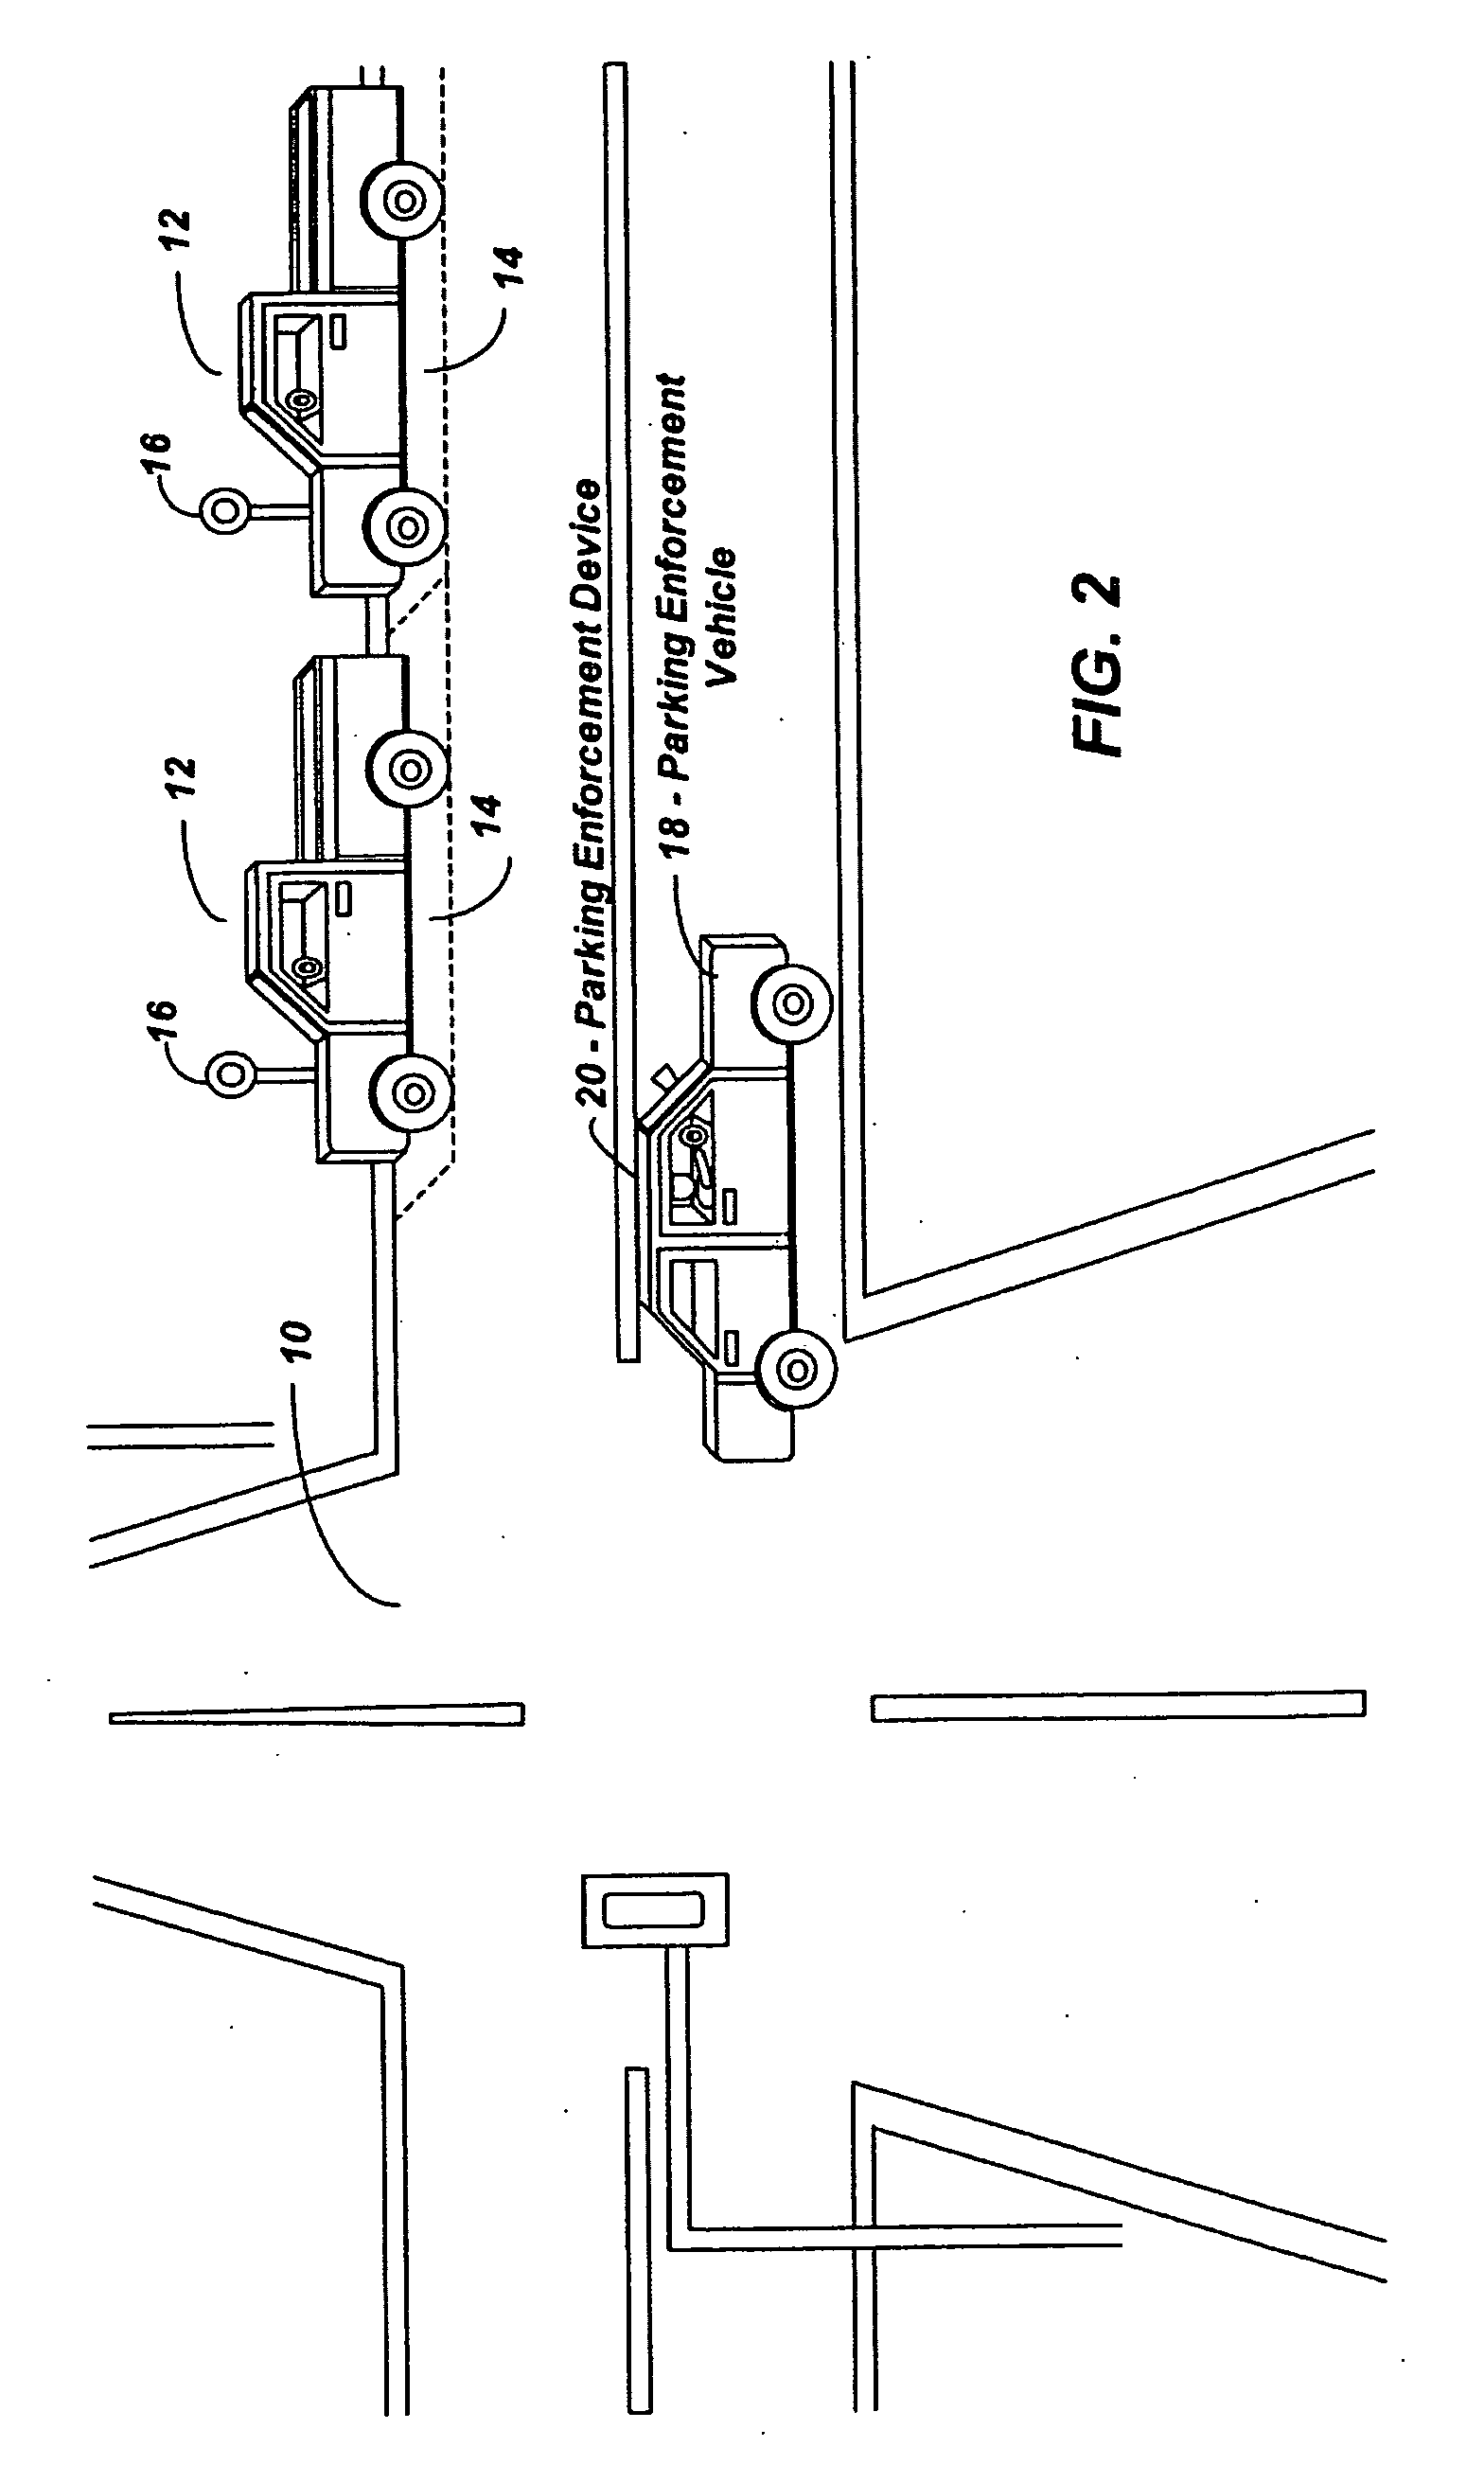 System and method for parking infraction detection